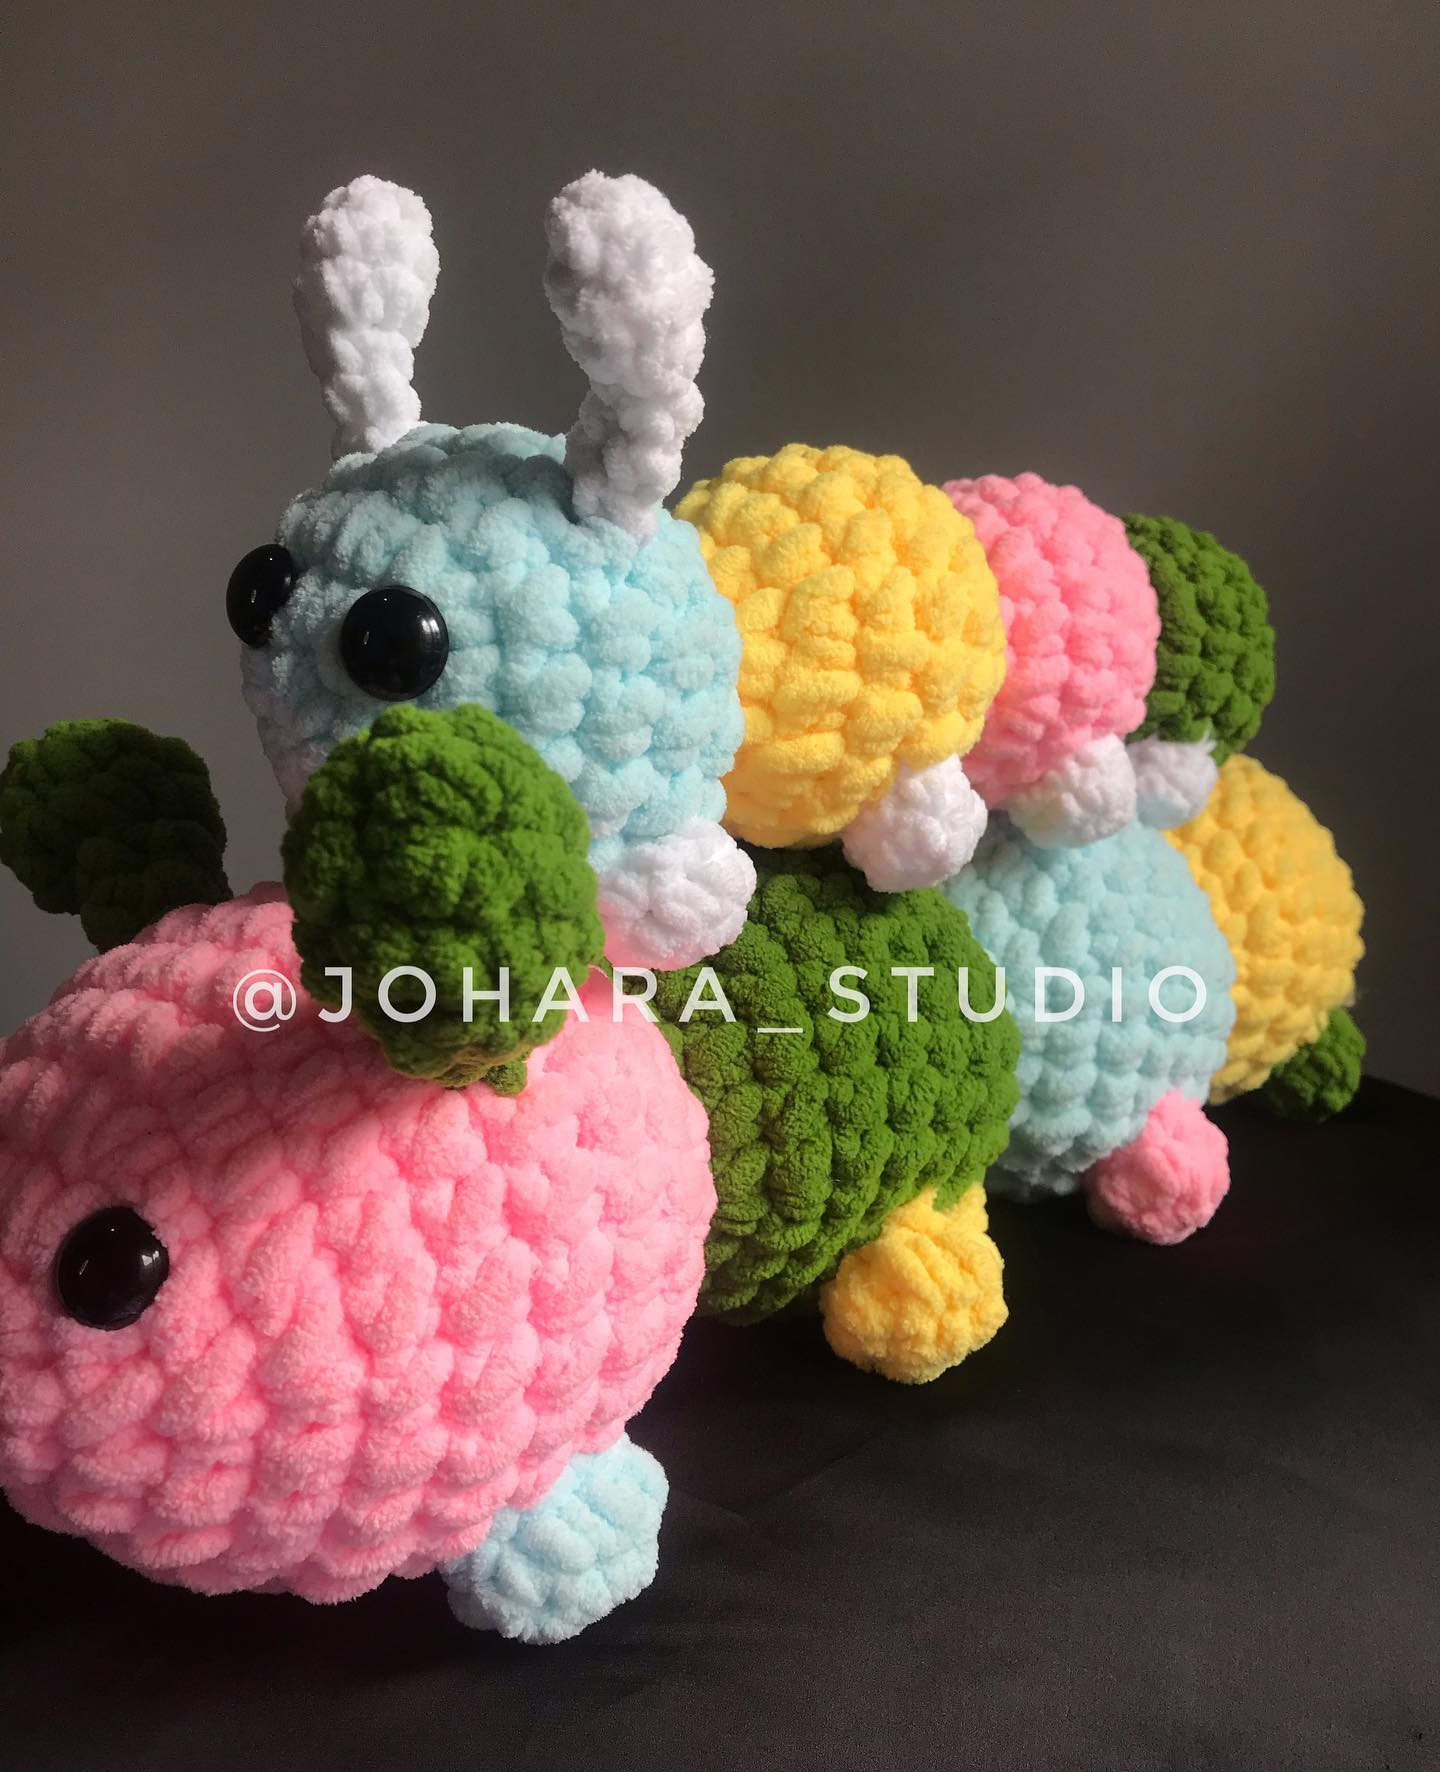 Mother worm crochet pattern carrying baby worm